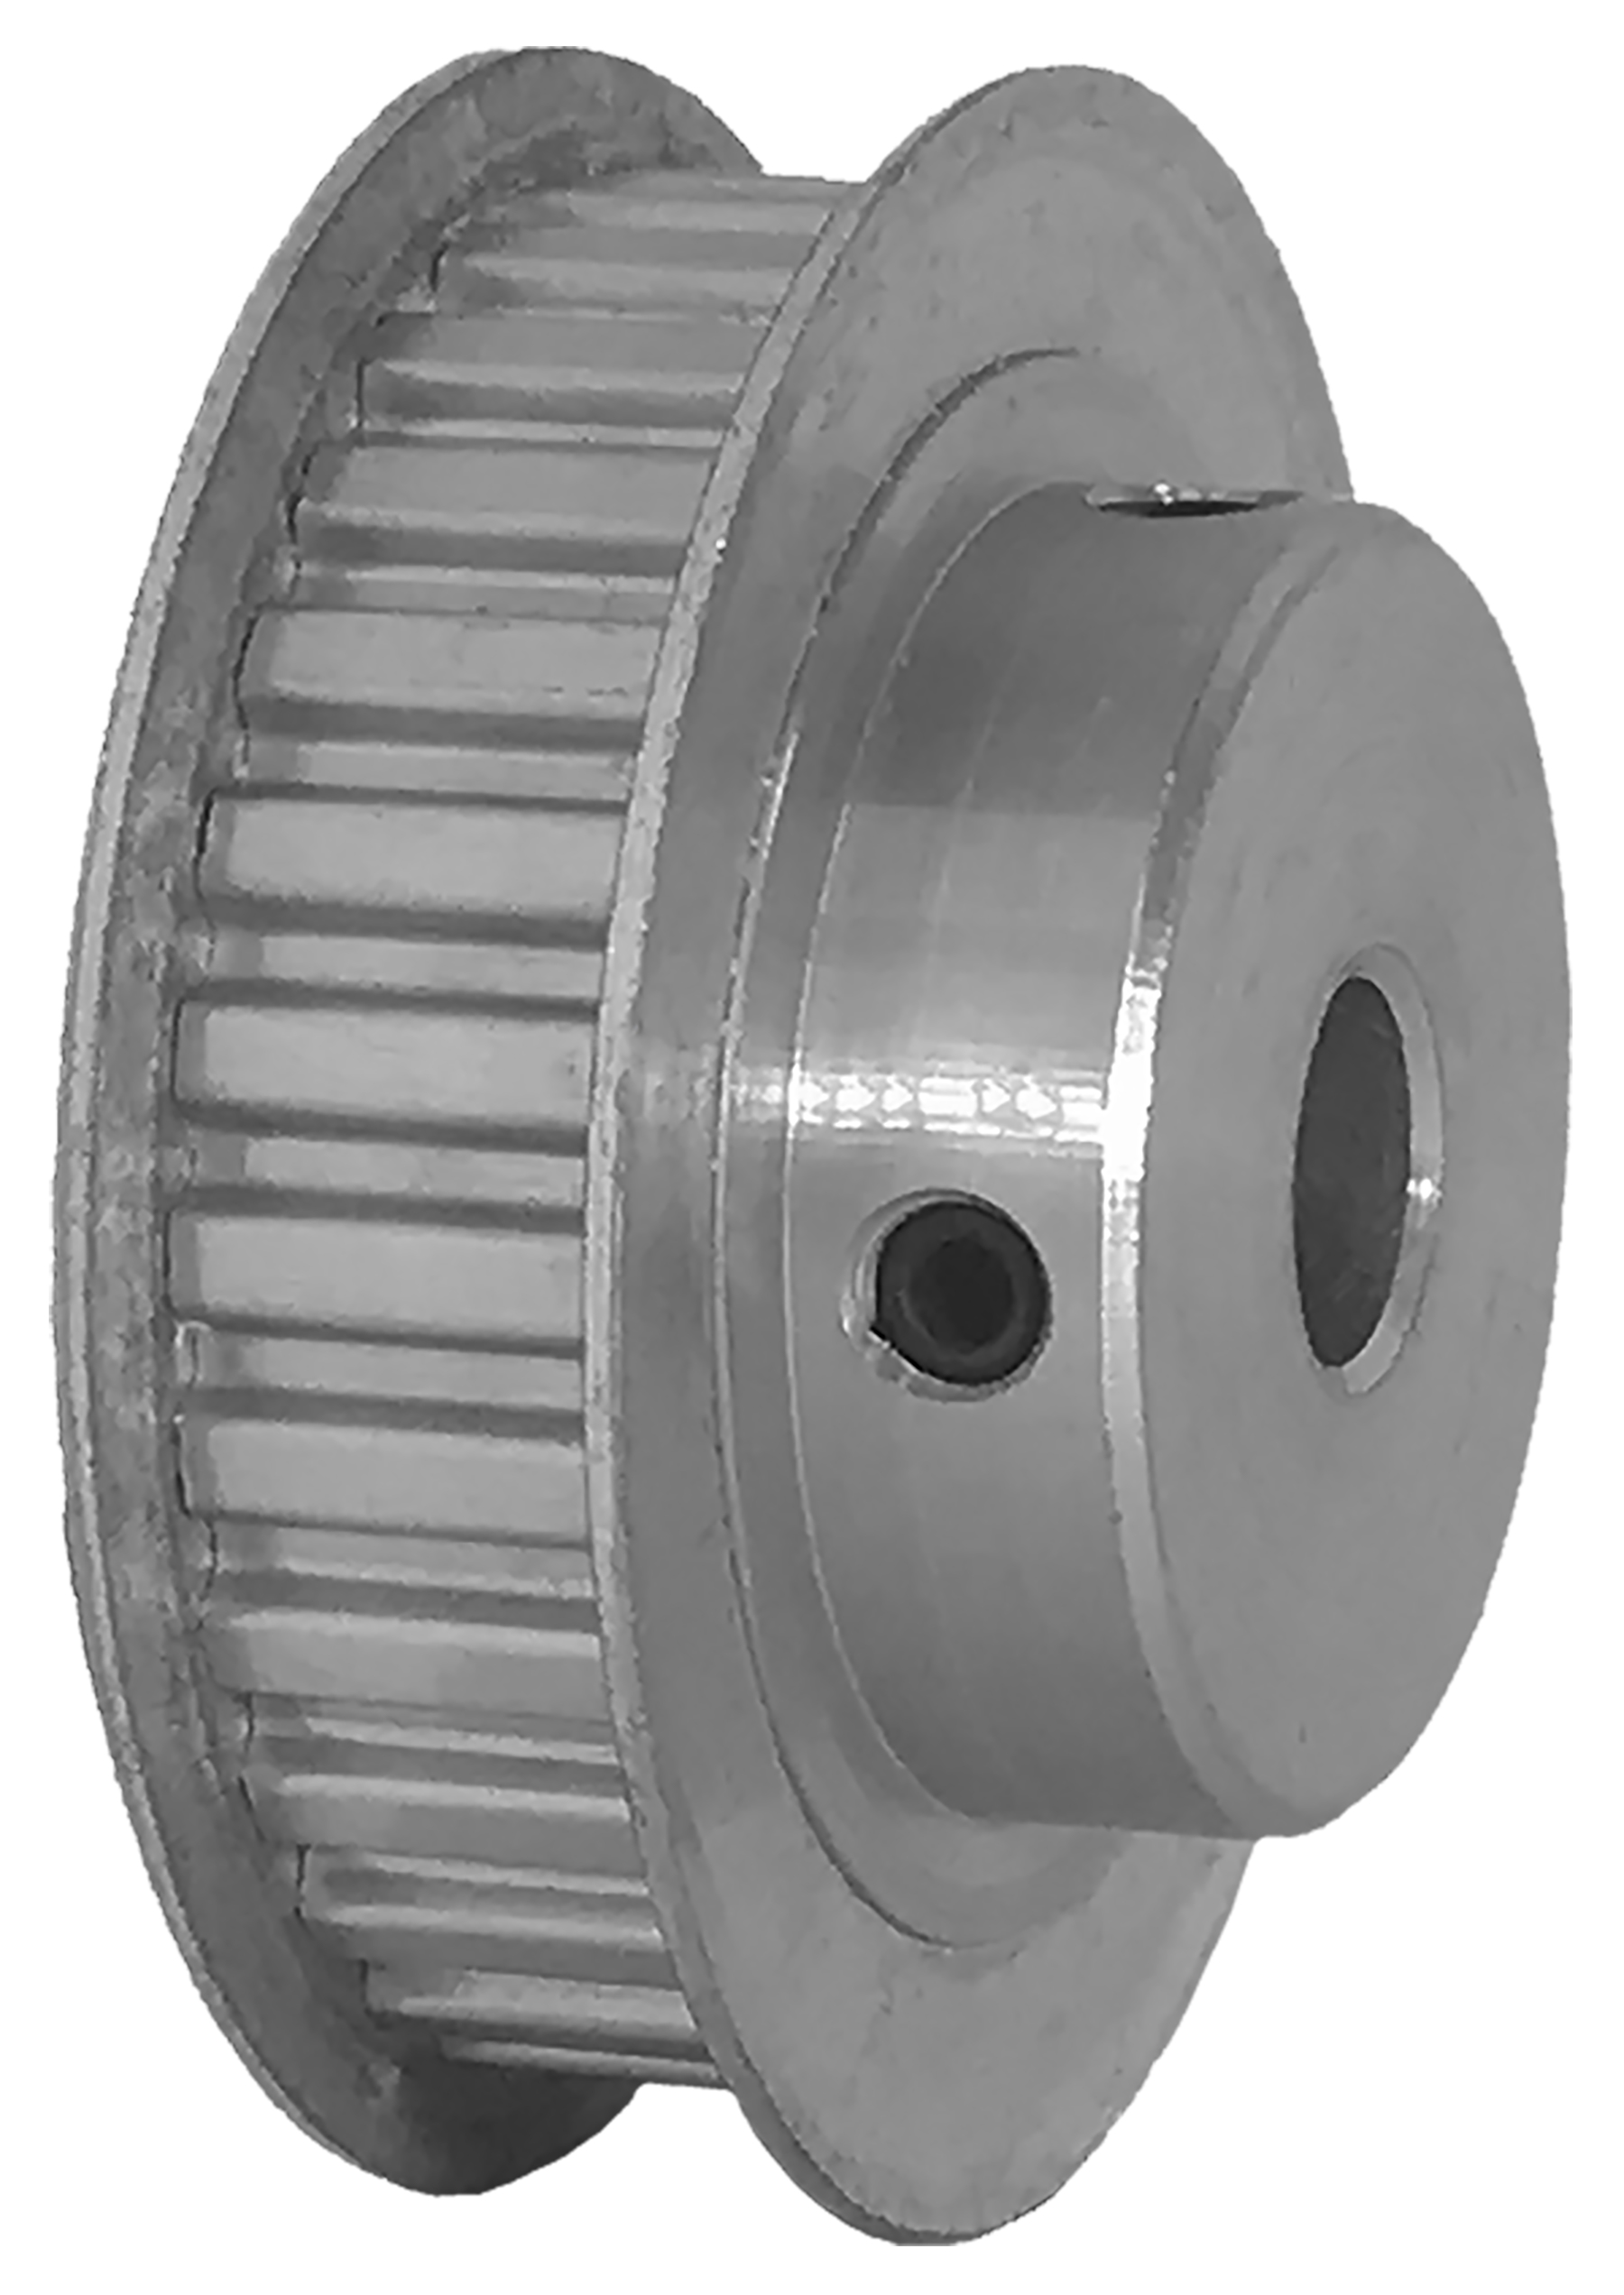 30XL037-6FA5 - Aluminum Imperial Pitch Pulleys